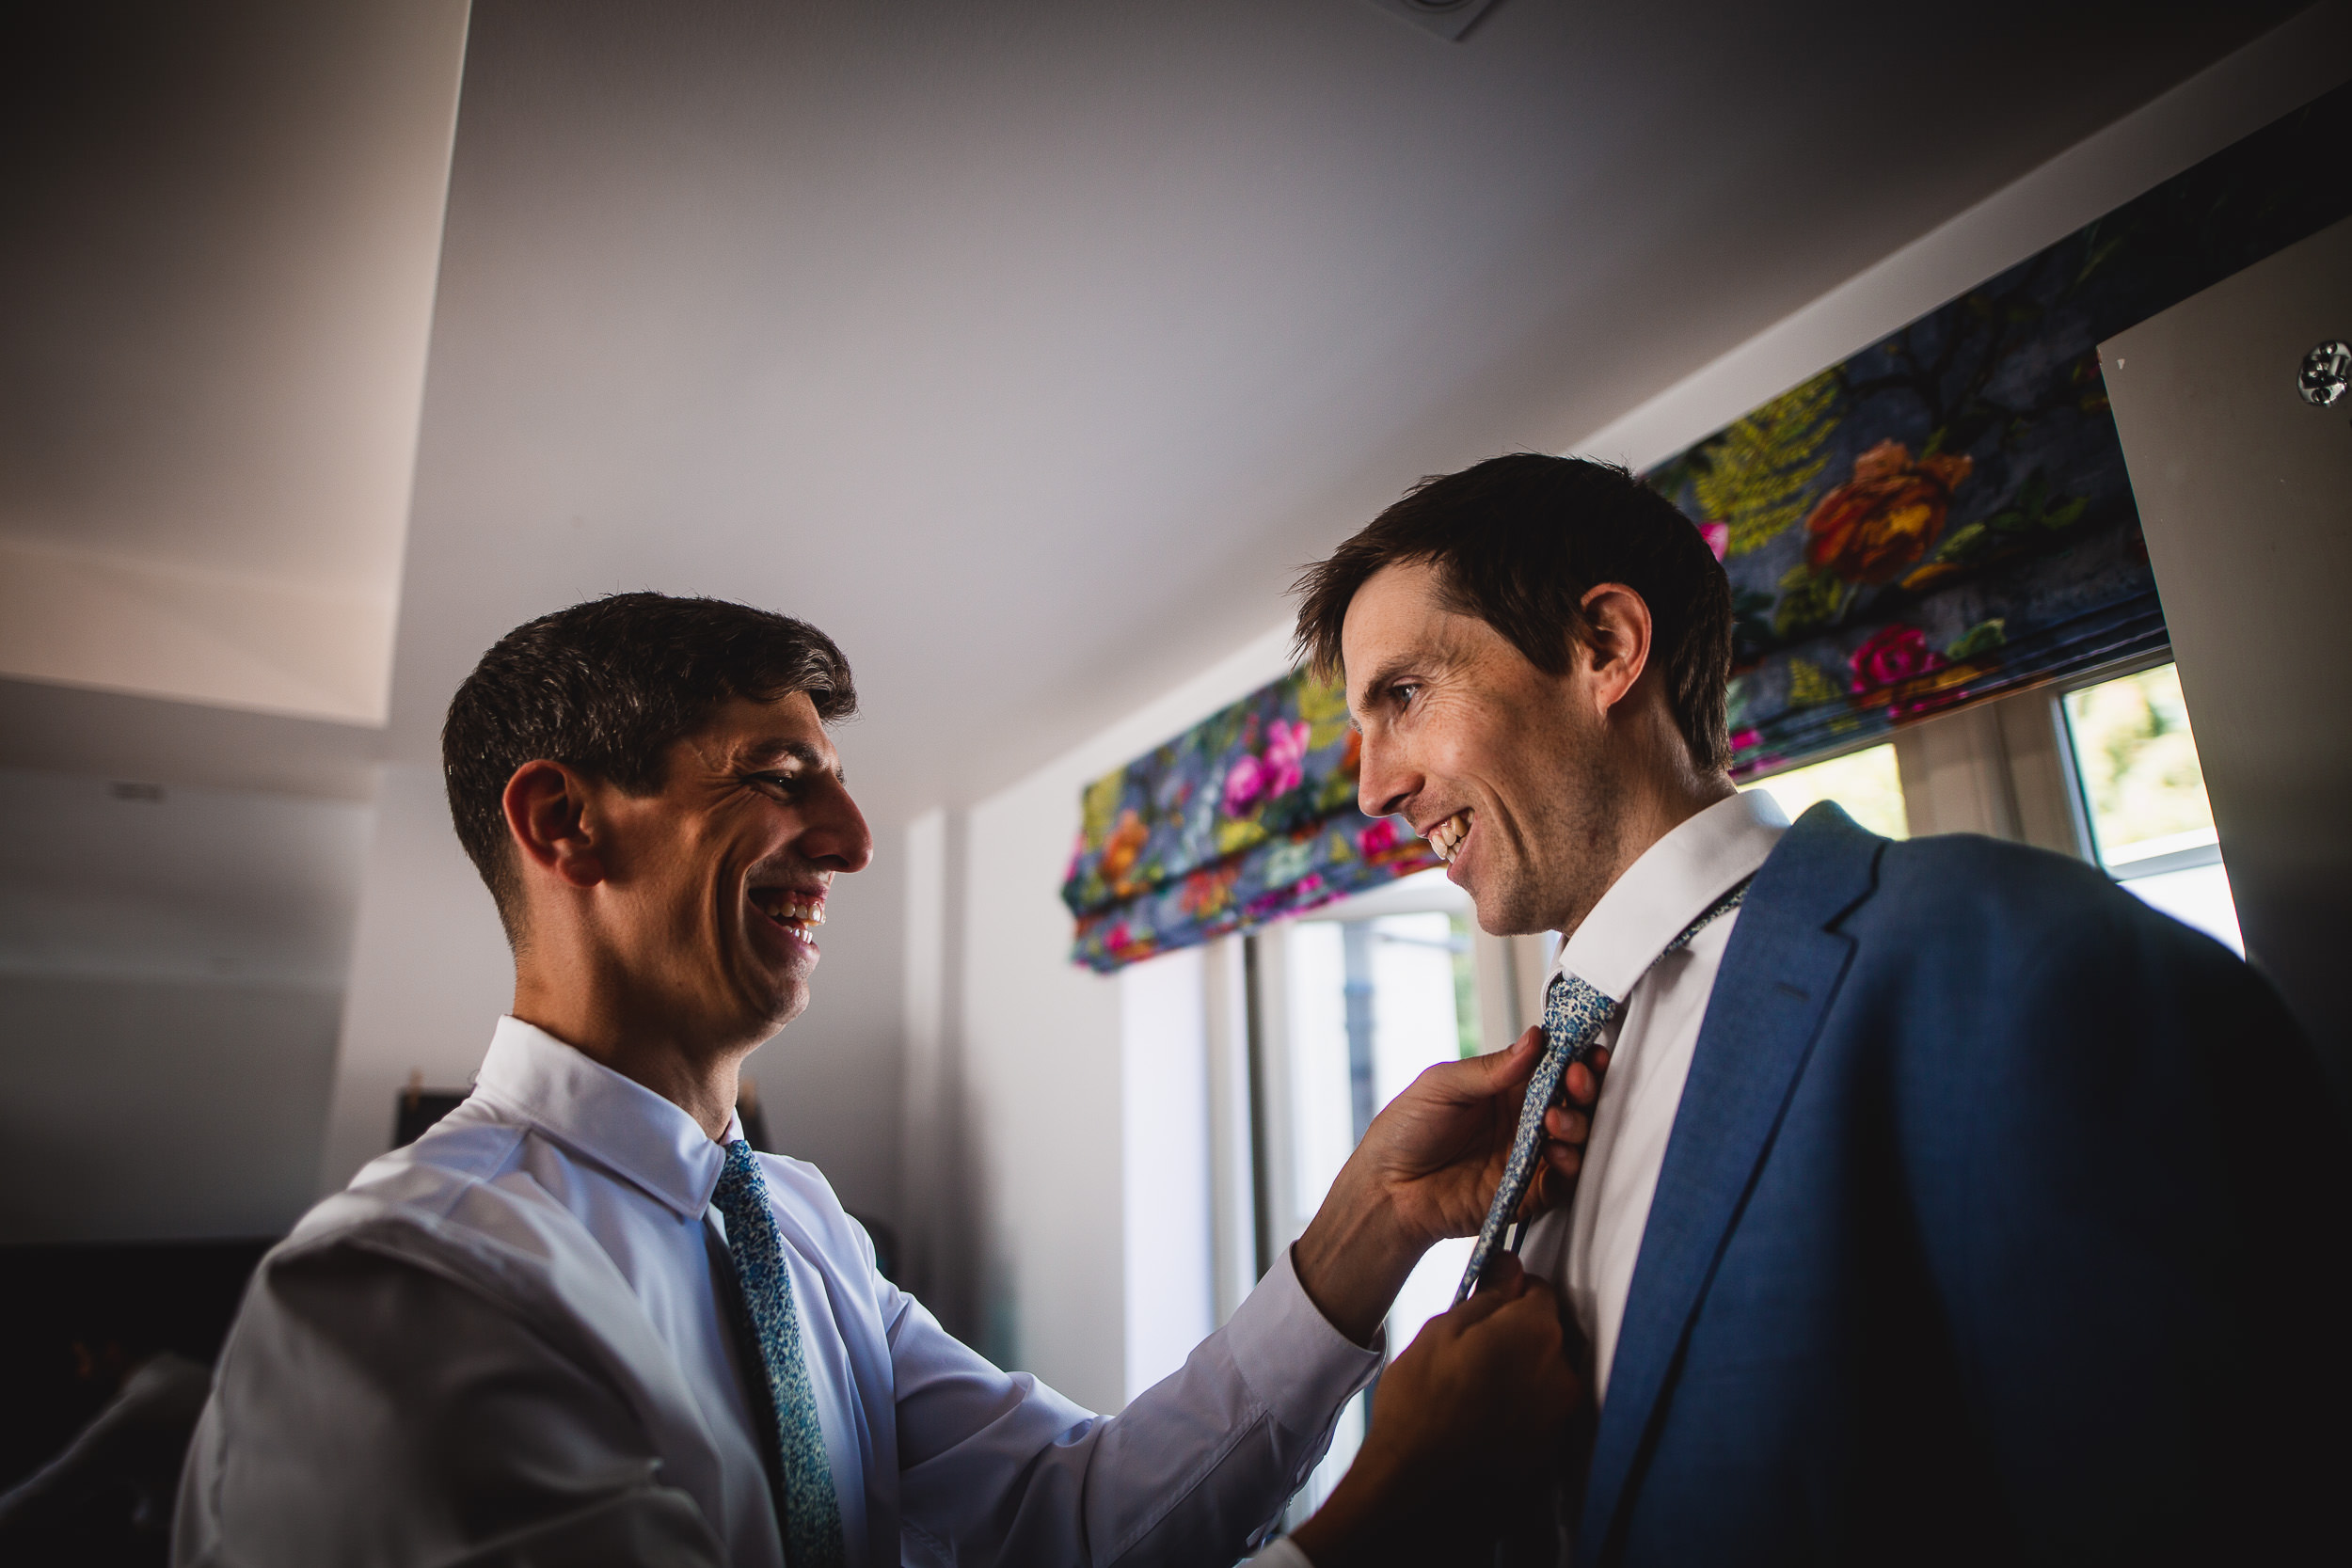 Two grooms getting ready for their wedding, tying their ties in front of a mirror while being photographed by a wedding photographer.